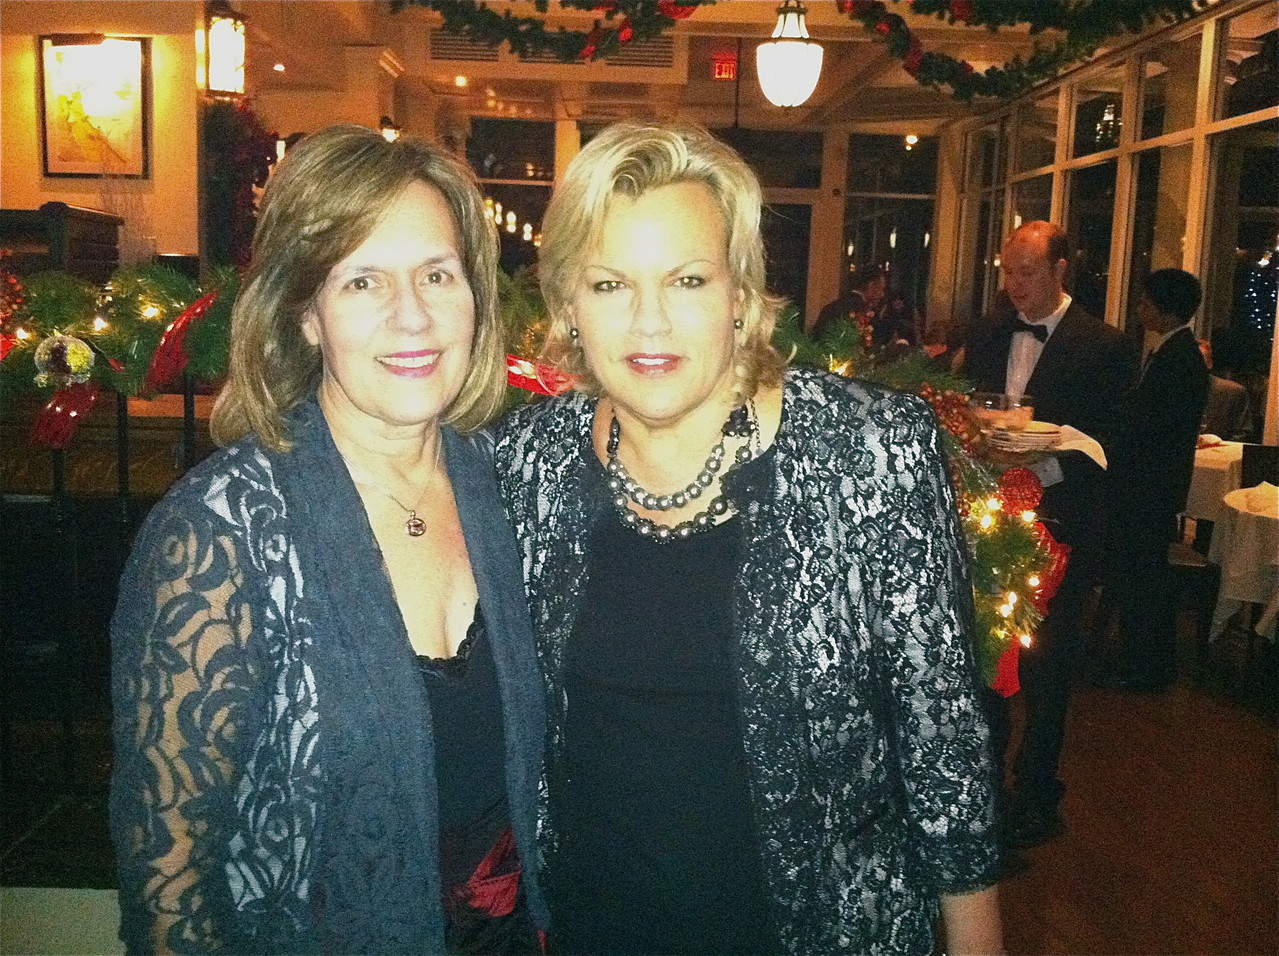 Lorraine & Celeste at a Holiday Party at the Boat House, Central Park, Dec. 18, 2012